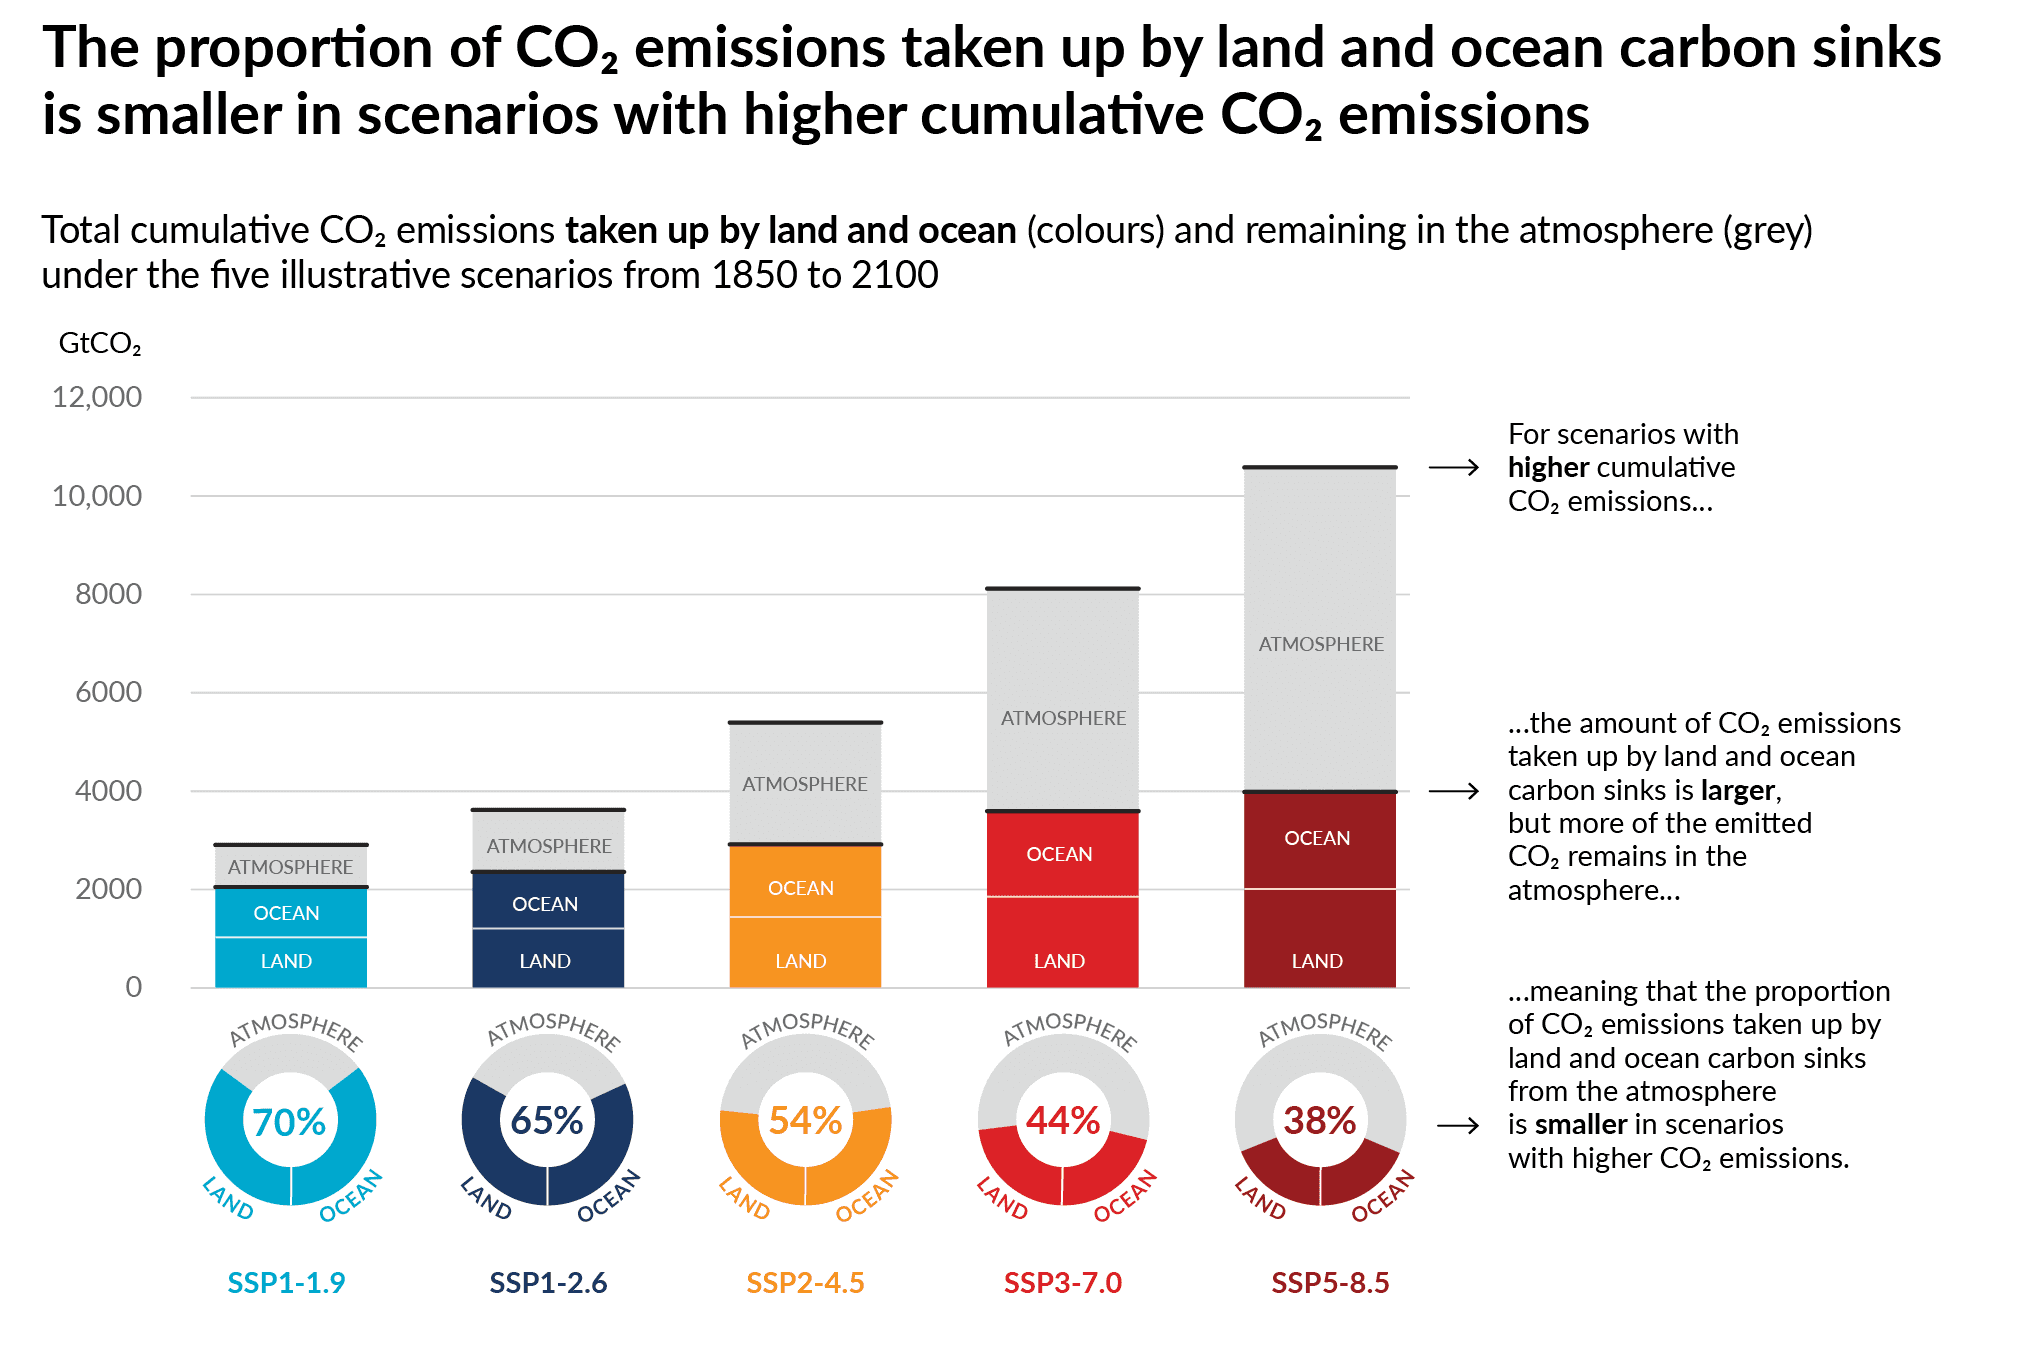 Figure SPM.7 | Cumulative anthropogenic CO2 emissions taken up by land and ocean sinks by 2100 under the five illustrative scenarios